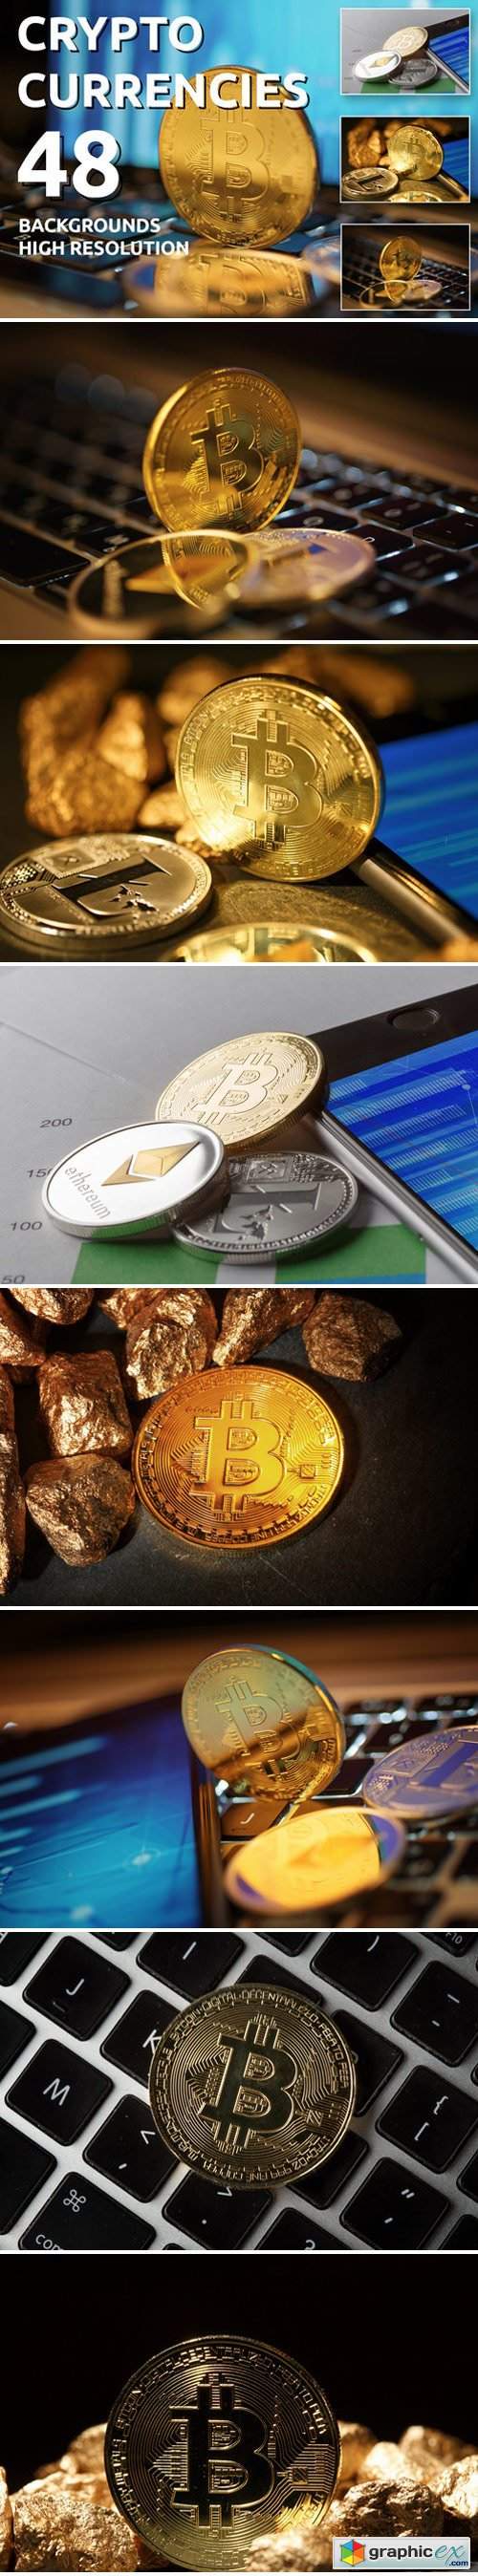 Crypto Currencies 48 Background